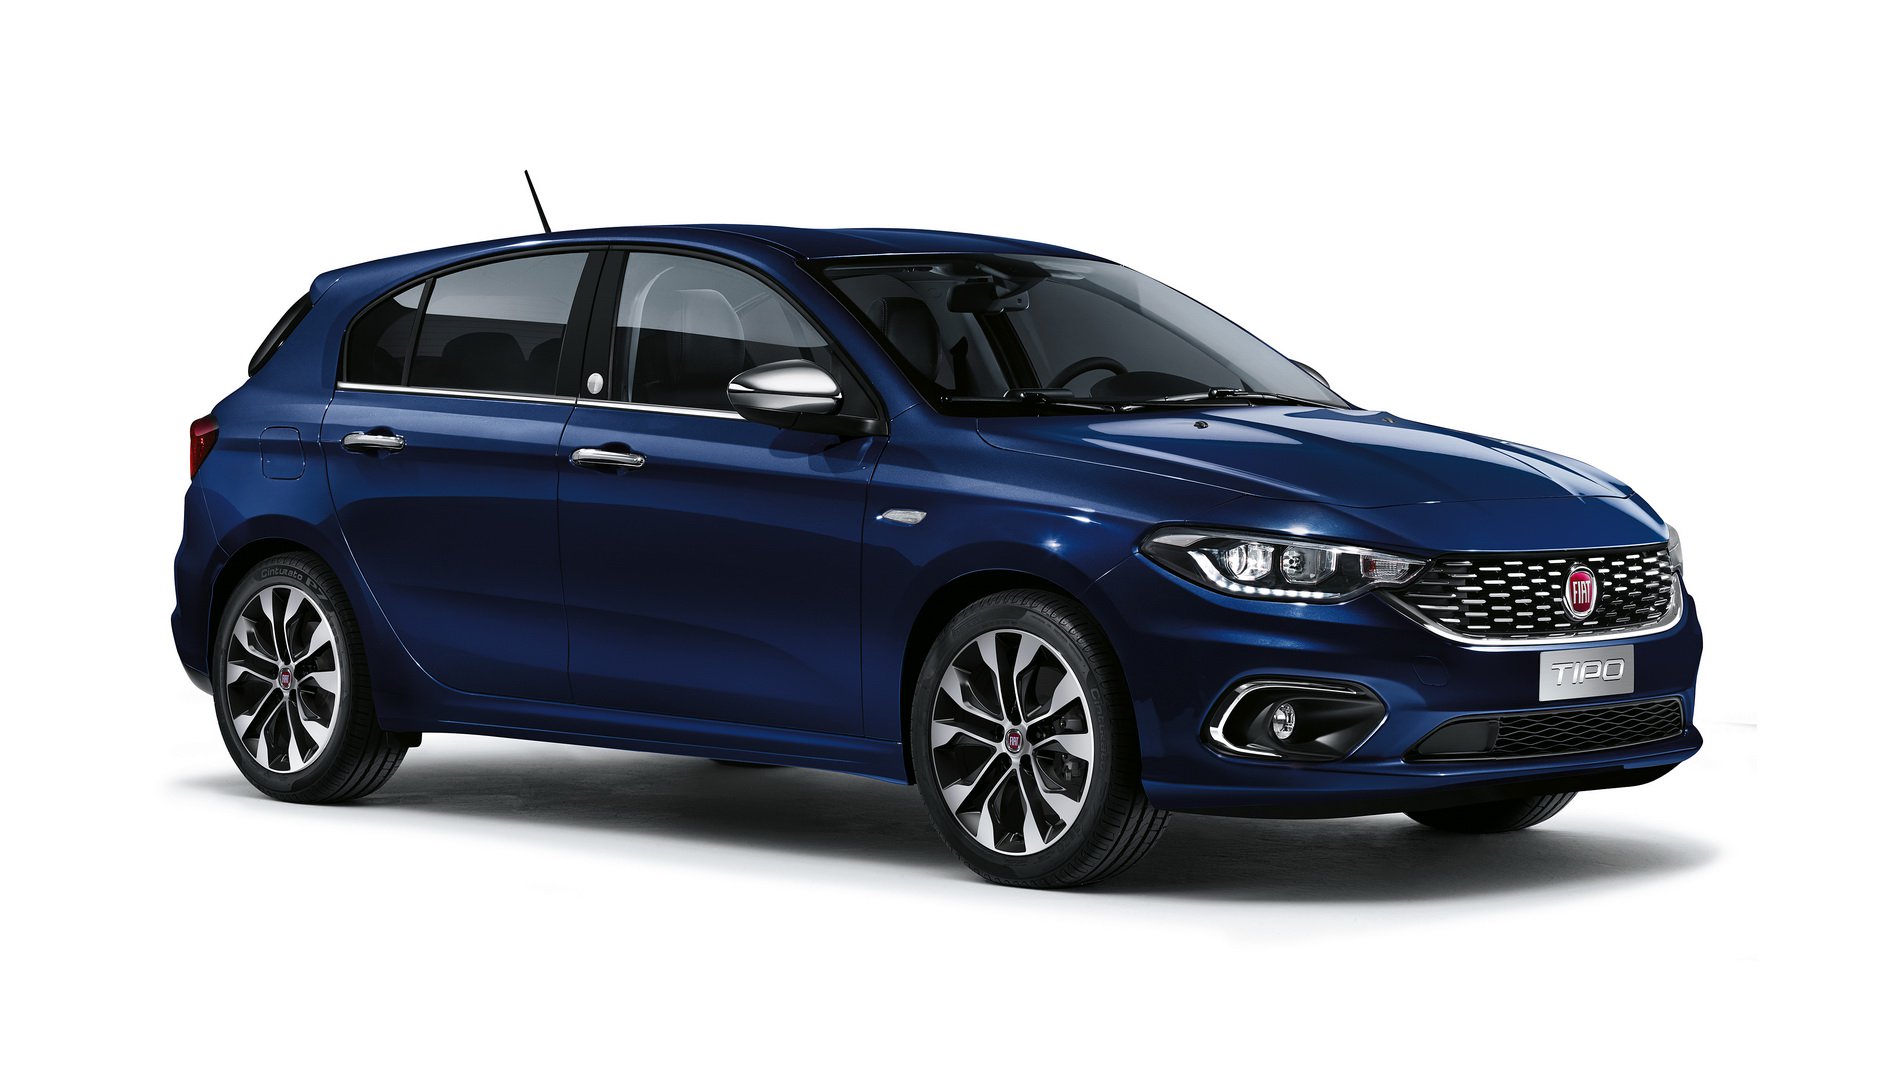 Fiat Tipo / Egea Hatchback Rendering Previews Future Compact Hatch ...